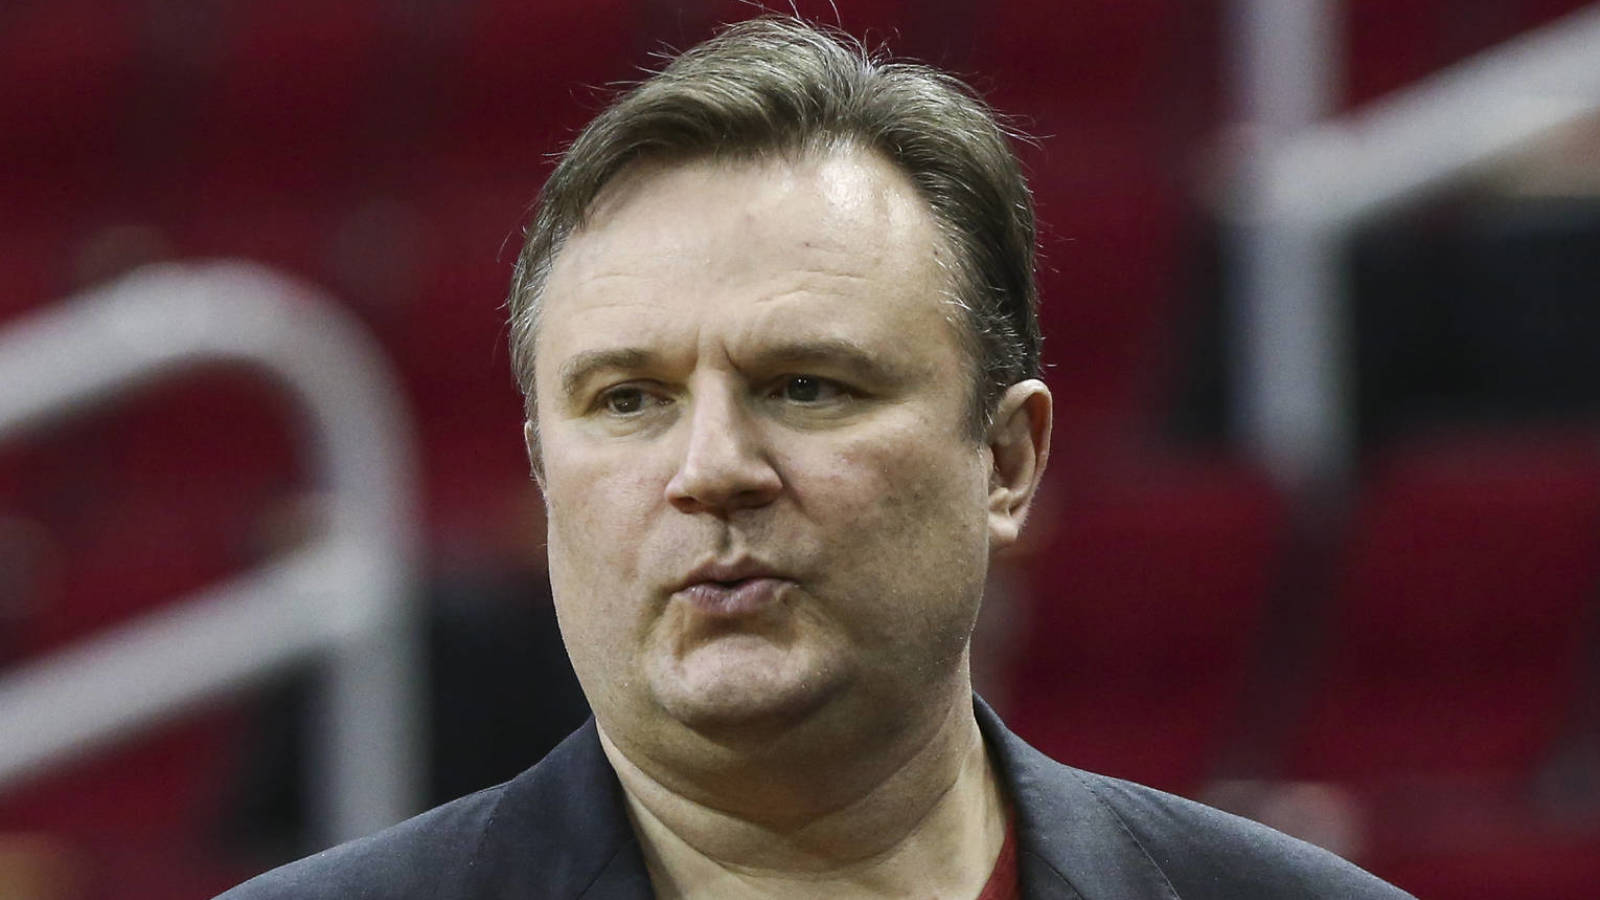 Daryl Morey worried about career amid threats to family over Hong Kong tweet